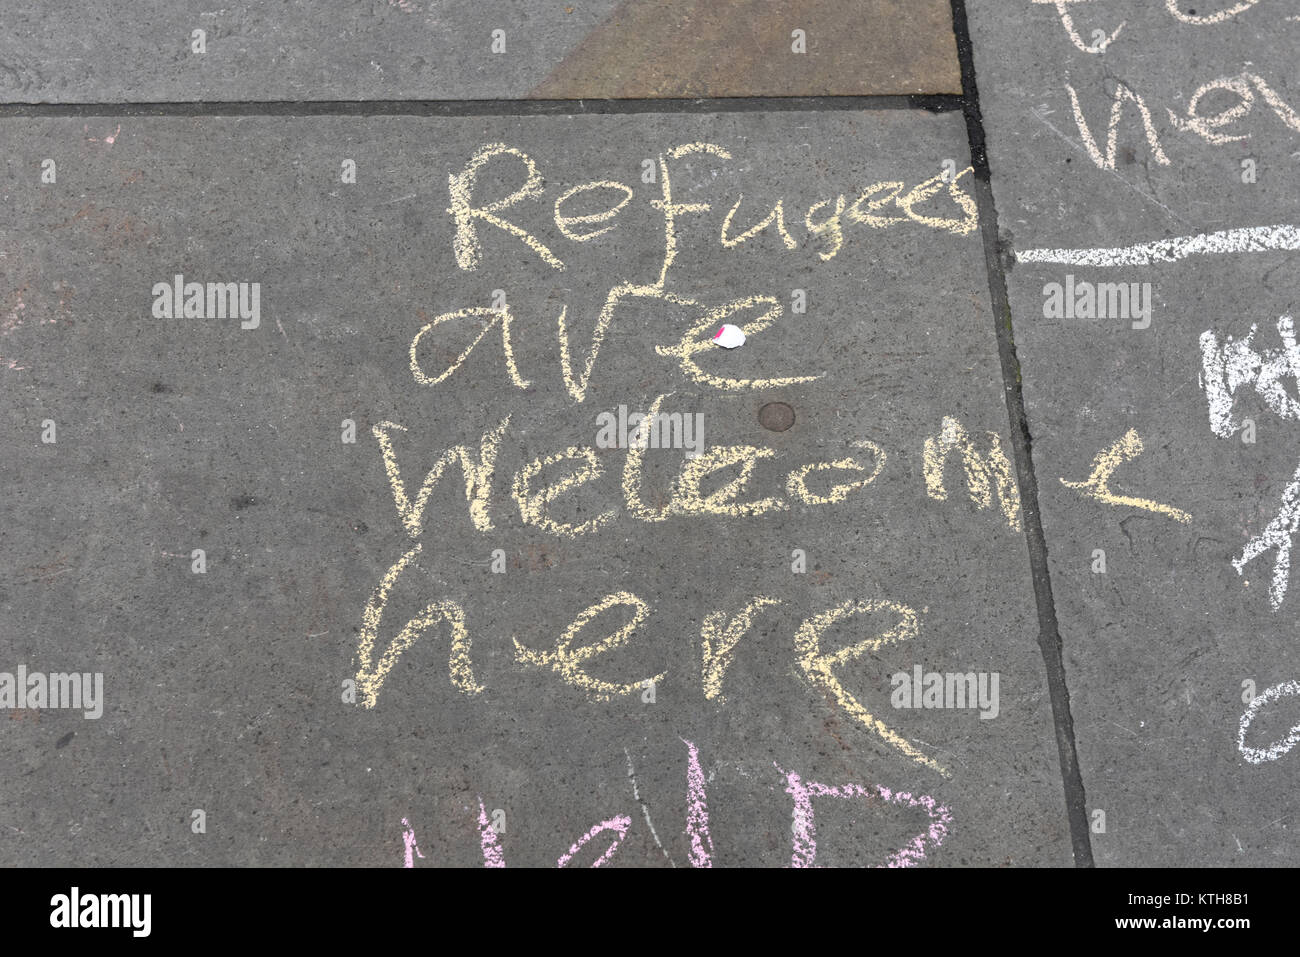 'Refugees are welcome here' message is written on the pavement by a child protester protesting against racism on UN Anti-Racism Day in London, UK. Stock Photo